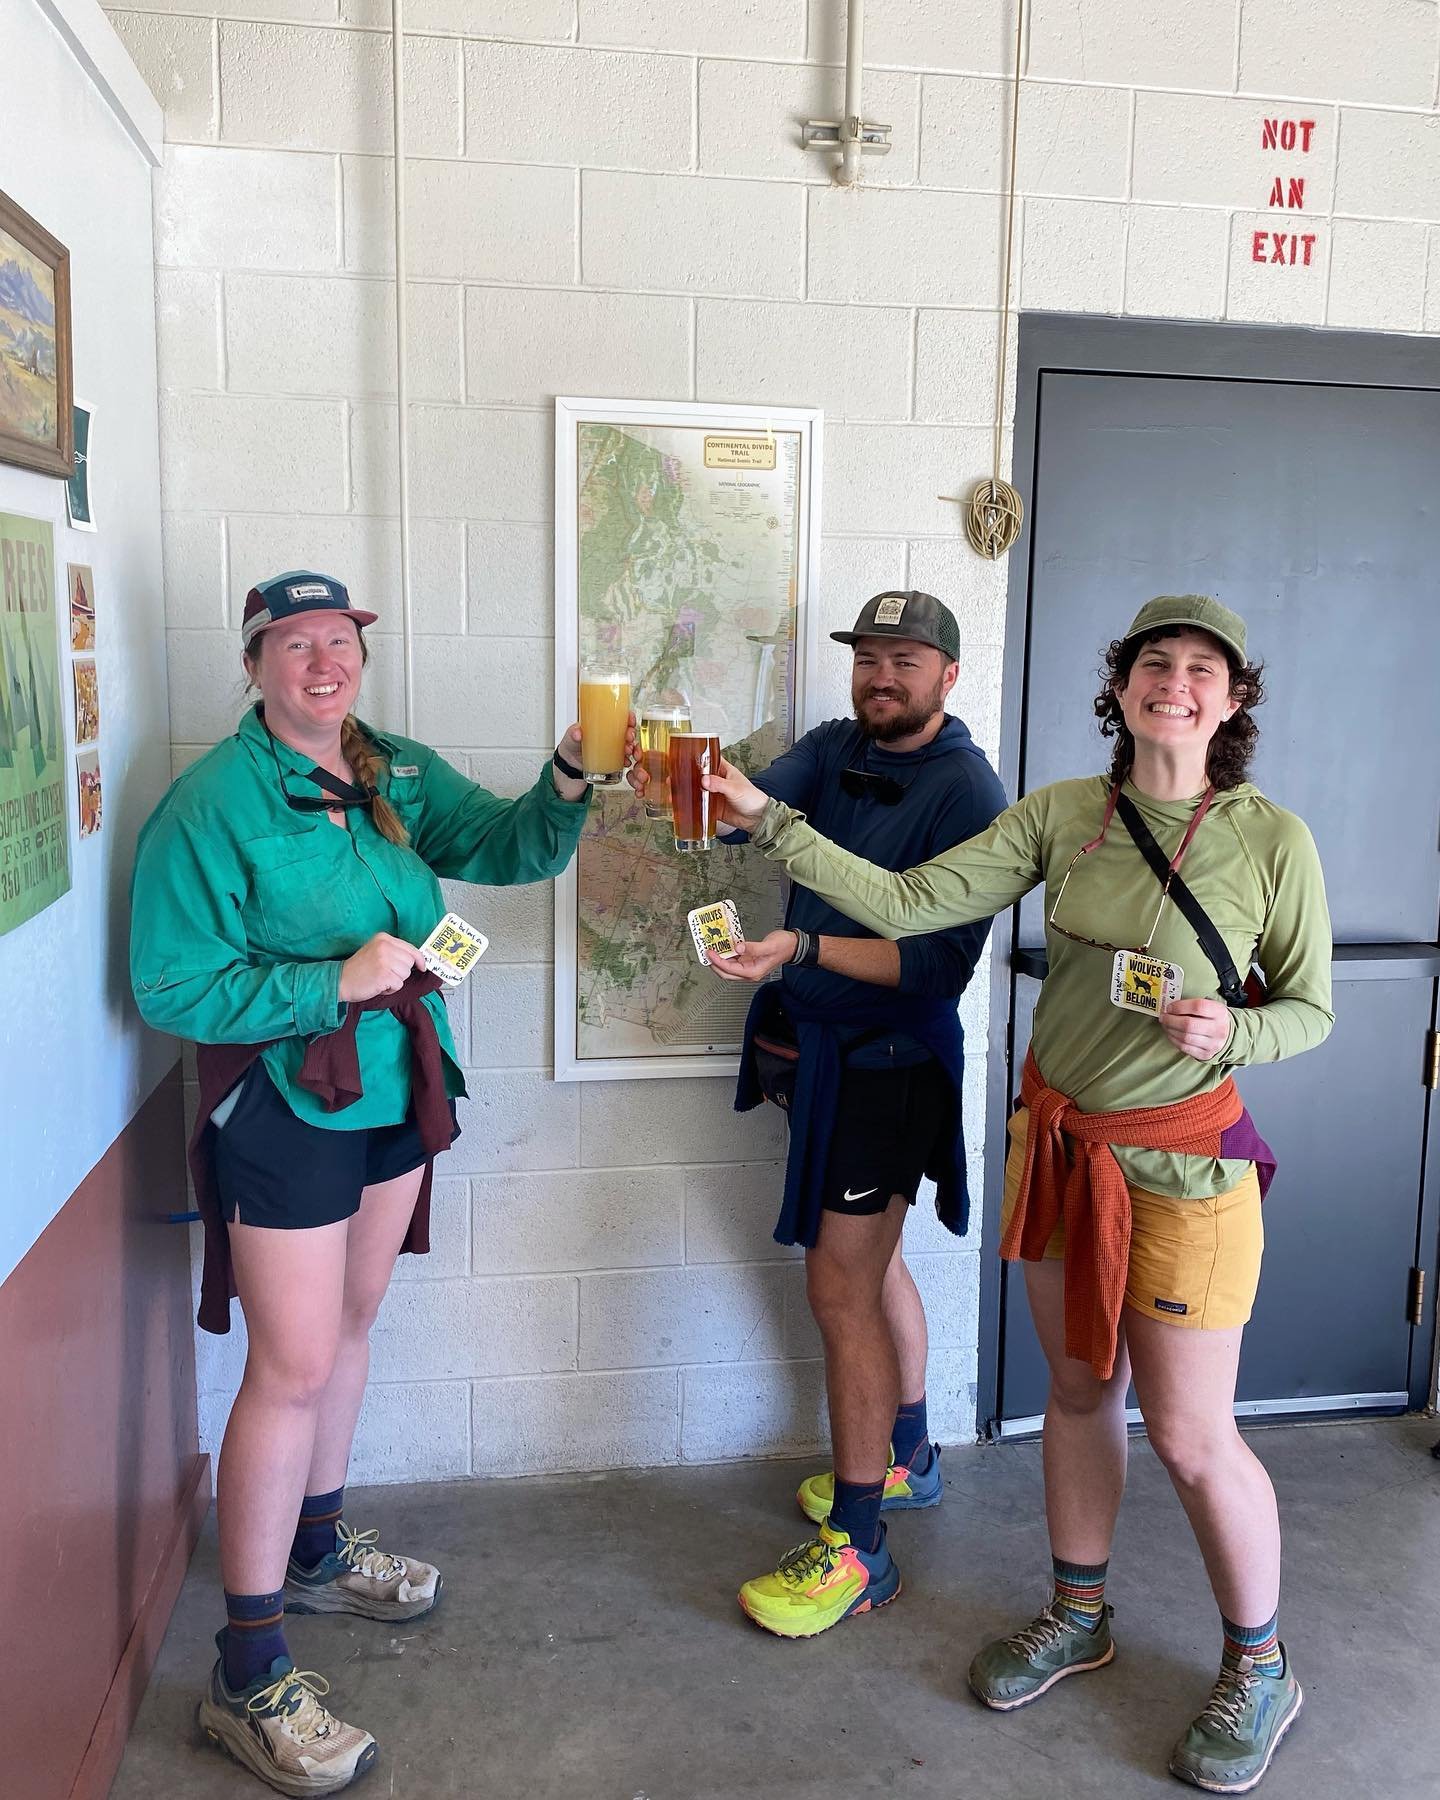 A few CDT hikers visited Open Space Brewing yesterday! @cdtcoalition 🙏🙌🥳🤩

These awesome hikers are the first to redeem our &ldquo;Trail Magic&rdquo; beers! 🍻 Here&rsquo;s the concept: Buy a hiker a beer or non-alcoholic drink and write them a m